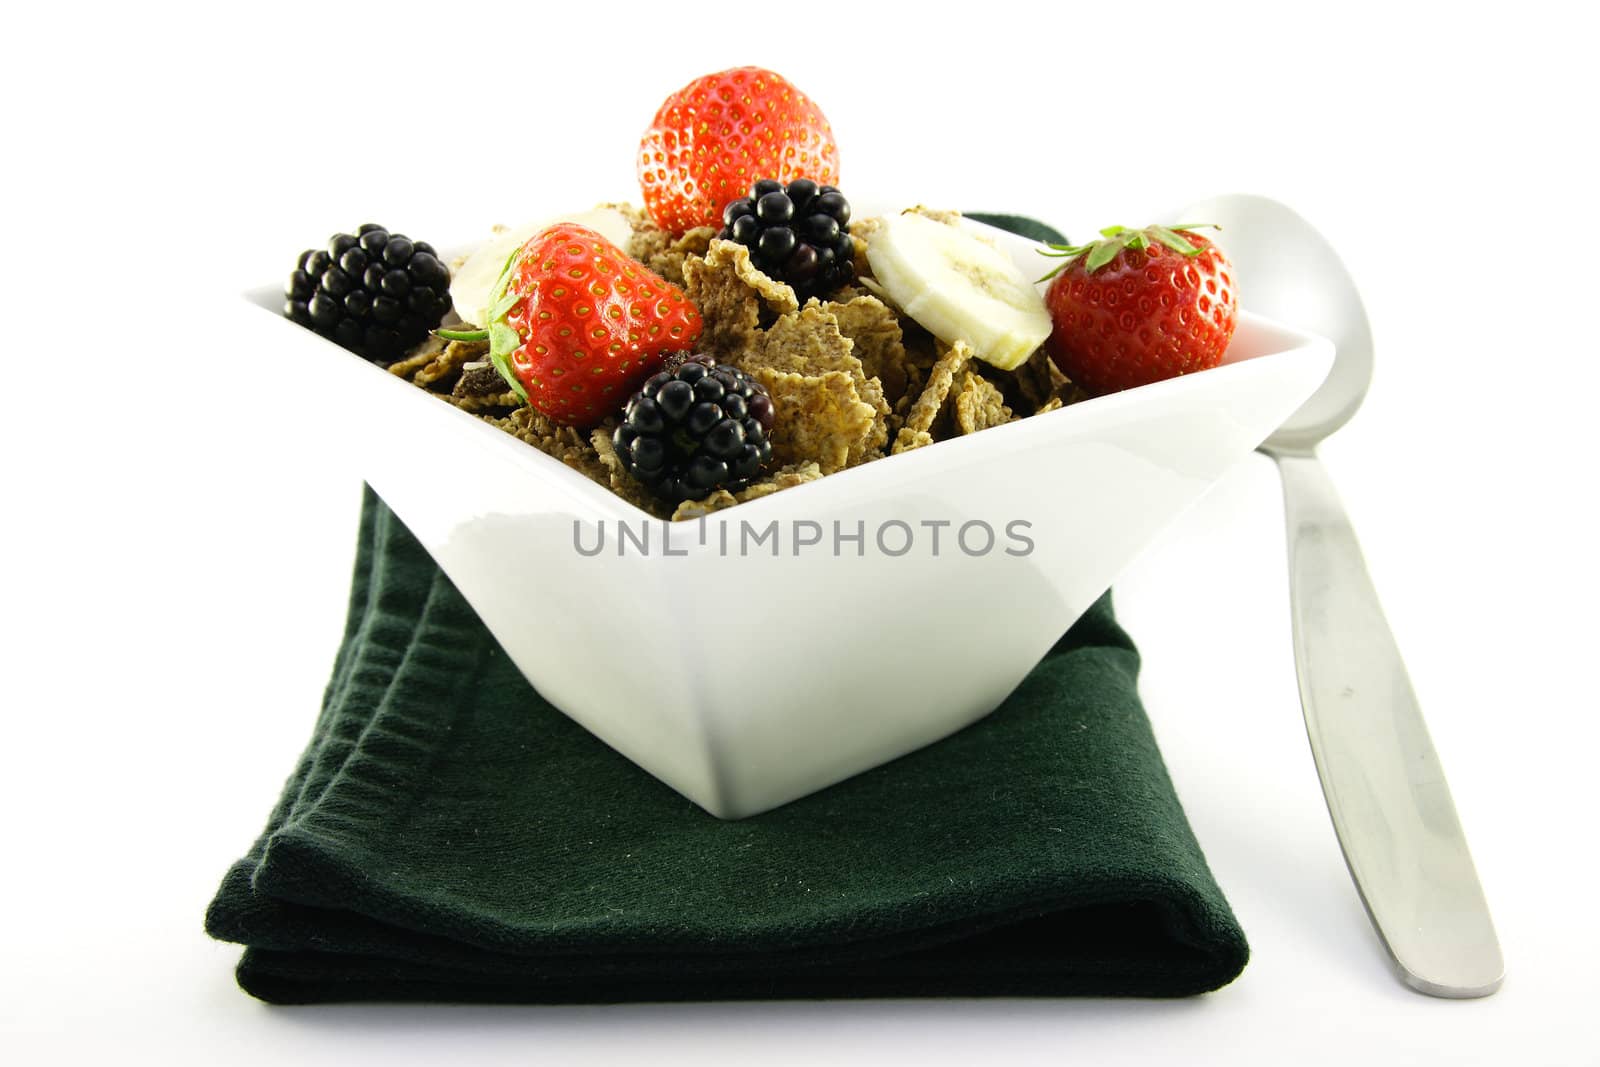 Bran Flakes in a White Bowl by KeithWilson